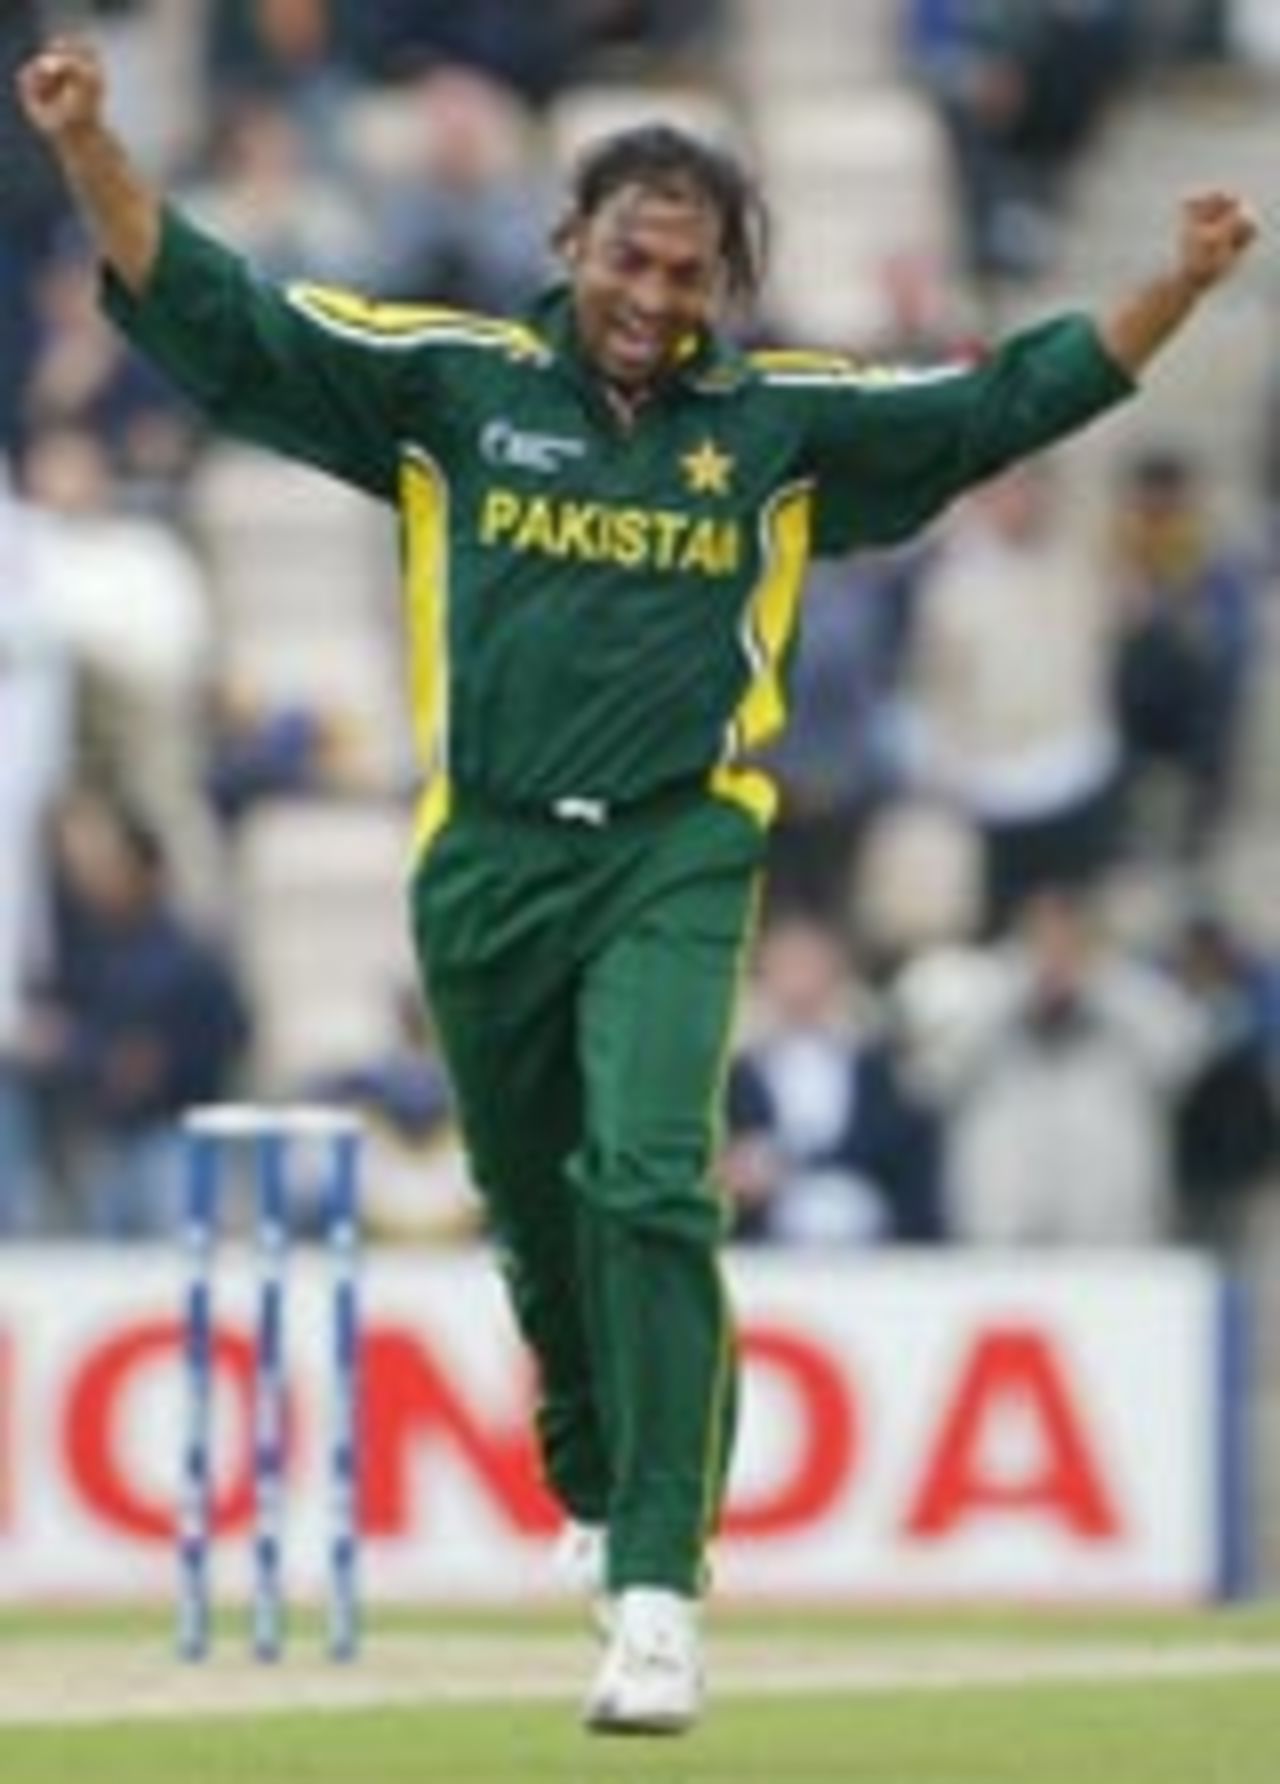 Shoaib Akhtar celebrates an early wicket, Pakistan v West Indies, ICC Champions Trophy, September 2 2004